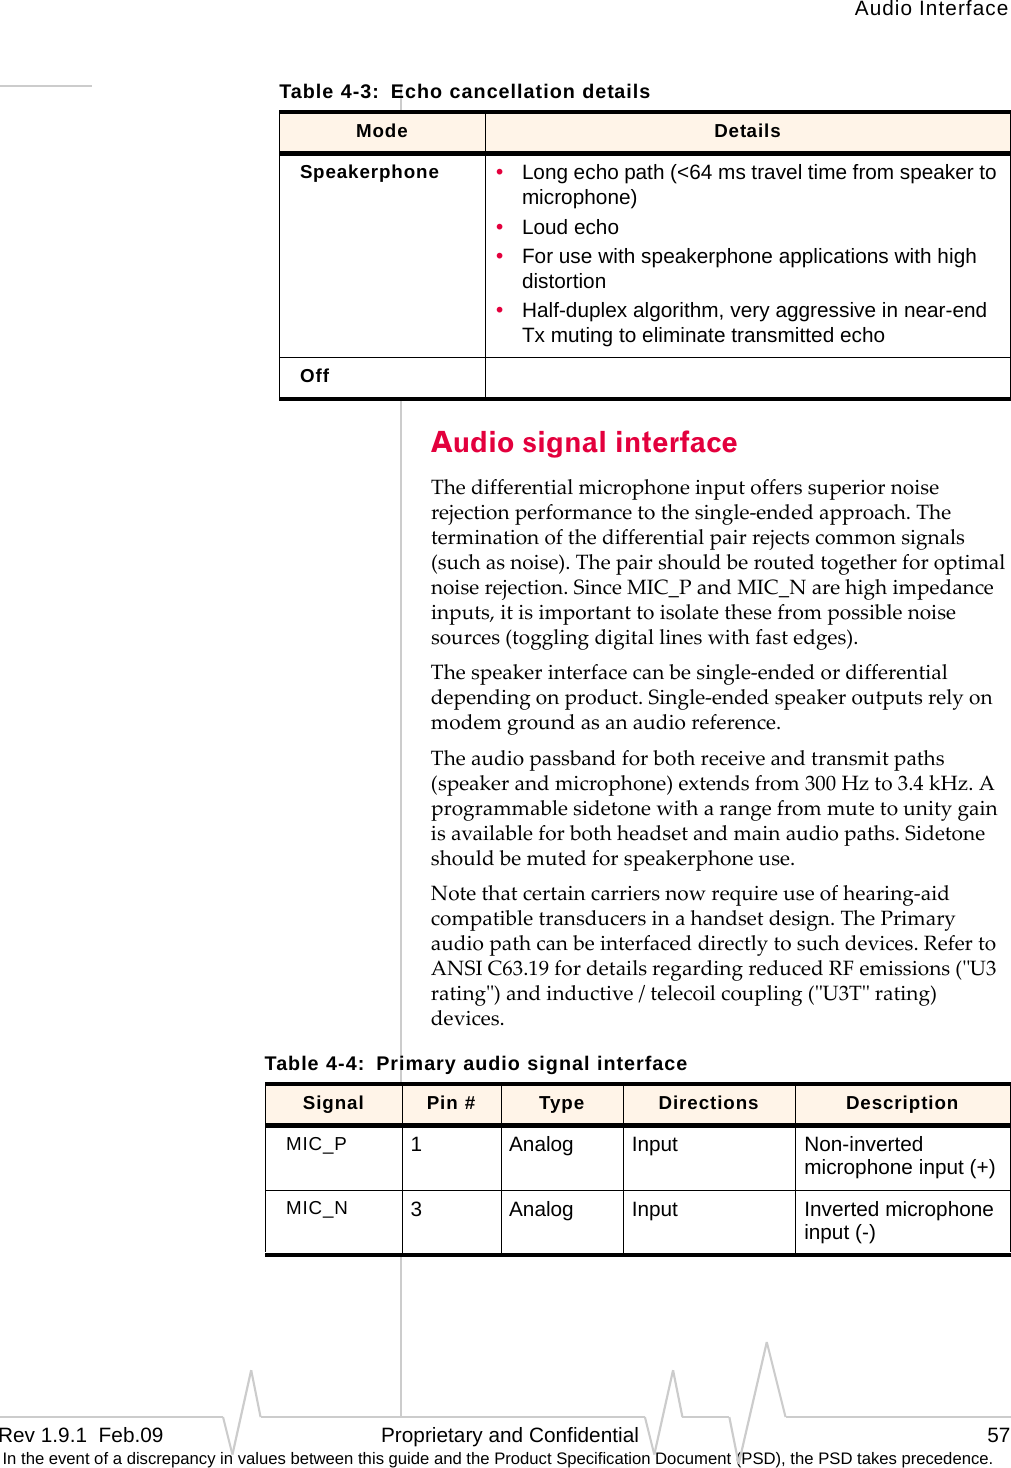 Audio InterfaceRev 1.9.1  Feb.09   Proprietary and Confidential 57 In the event of a discrepancy in values between this guide and the Product Specification Document (PSD), the PSD takes precedence.Audio signal interfaceThedifferentialmicrophoneinputofferssuperiornoiserejectionperformancetothesingle‐endedapproach.Theterminationofthedifferentialpairrejectscommonsignals(suchasnoise).Thepairshouldberoutedtogetherforoptimalnoiserejection.SinceMIC_PandMIC_Narehighimpedanceinputs,itisimportanttoisolatethesefrompossiblenoisesources(togglingdigitallineswithfastedges).Thespeakerinterfacecanbesingle‐endedordifferentialdependingonproduct.Single‐endedspeakeroutputsrelyonmodemgroundasanaudioreference.Theaudiopassbandforbothreceiveandtransmitpaths(speakerandmicrophone)extendsfrom300Hzto3.4kHz.Aprogrammablesidetonewitharangefrommutetounitygainisavailableforbothheadsetandmainaudiopaths.Sidetoneshouldbemutedforspeakerphoneuse.Notethatcertaincarriersnowrequireuseofhearing‐aidcompatibletransducersinahandsetdesign.ThePrimaryaudiopathcanbeinterfaceddirectlytosuchdevices.RefertoANSIC63.19fordetailsregardingreducedRFemissions(ʺU3ratingʺ)andinductive/telecoilcoupling(ʺU3Tʺrating)devices.Speakerphone •Long echo path (&lt;64 ms travel time from speaker to microphone)•Loud echo•For use with speakerphone applications with high distortion•Half-duplex algorithm, very aggressive in near-end Tx muting to eliminate transmitted echoOffTable 4-3:  Echo cancellation detailsMode DetailsTable 4-4:  Primary audio signal interfaceSignal Pin # Type Directions DescriptionMIC_P 1Analog Input Non-inverted microphone input (+)MIC_N 3Analog Input Inverted microphone input (-)